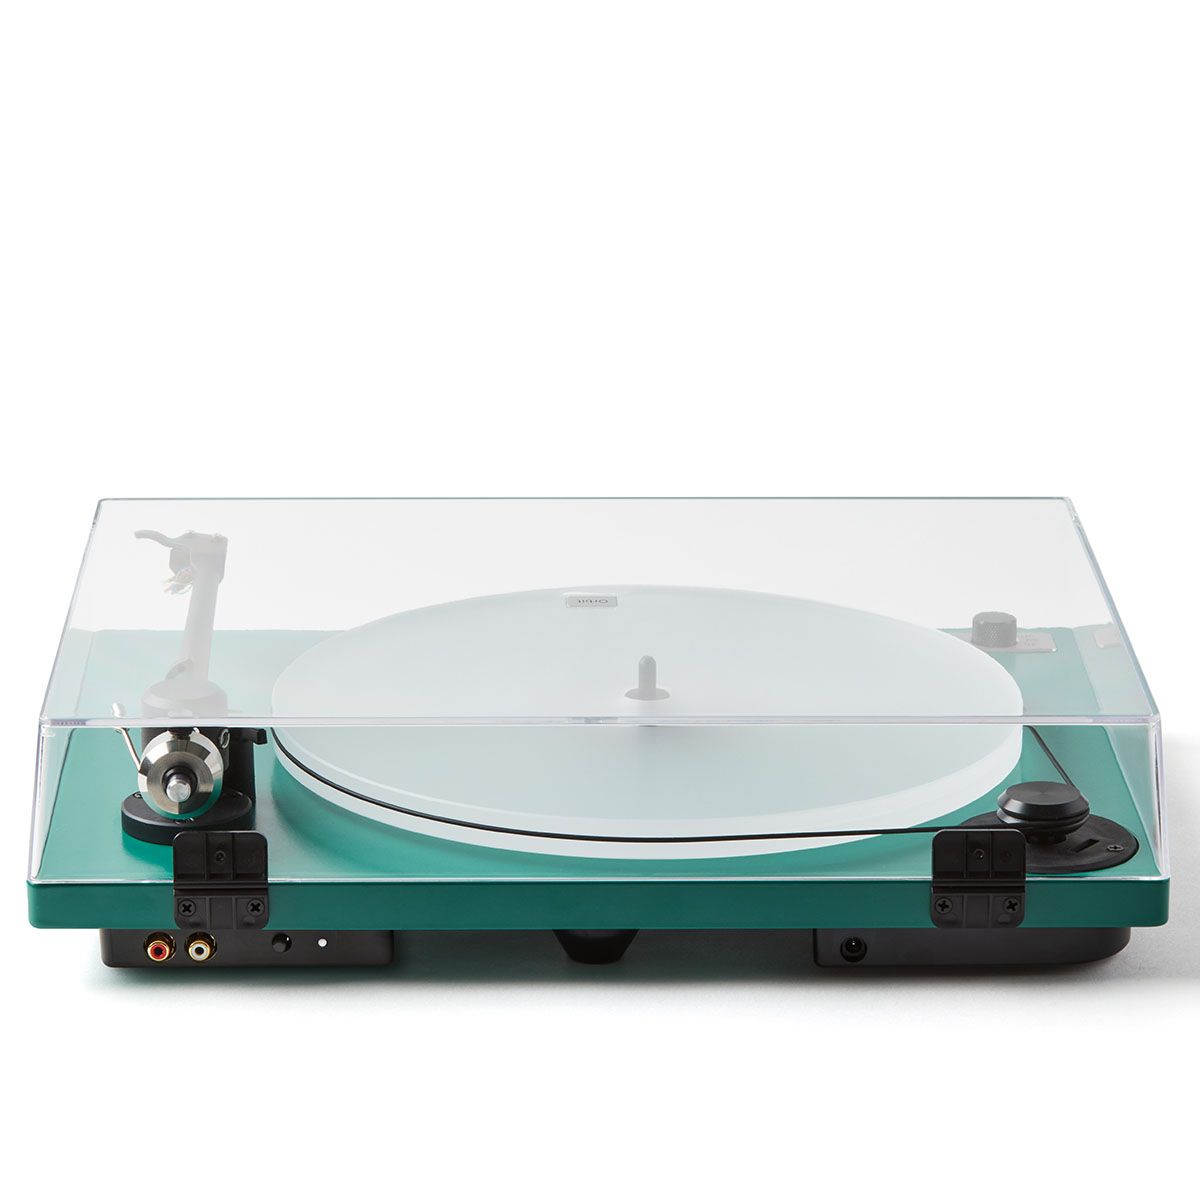 U-Turn Audio Orbit 2 Special Turntable - rear inputs with preamp - green